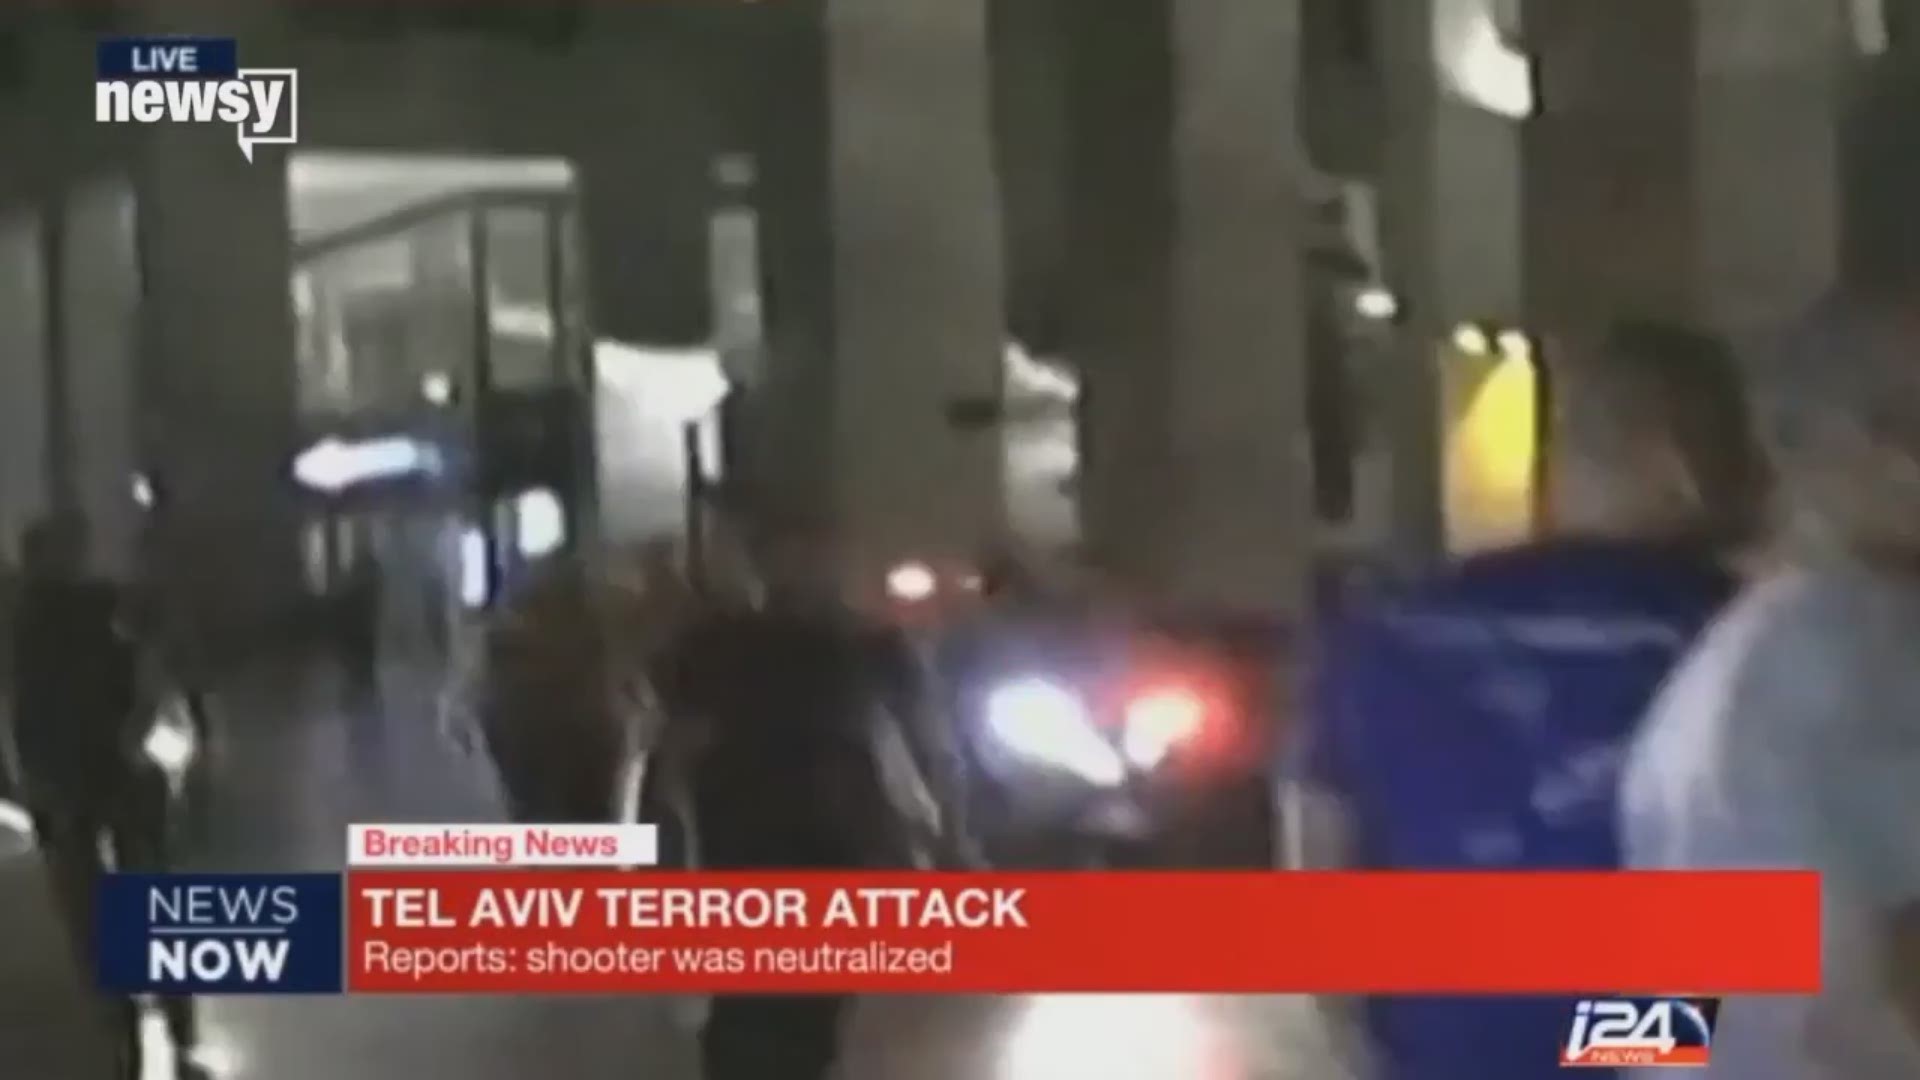 The shooting happened outside of a Tel Aviv shopping center late Wednesday.Video provided by Newsy